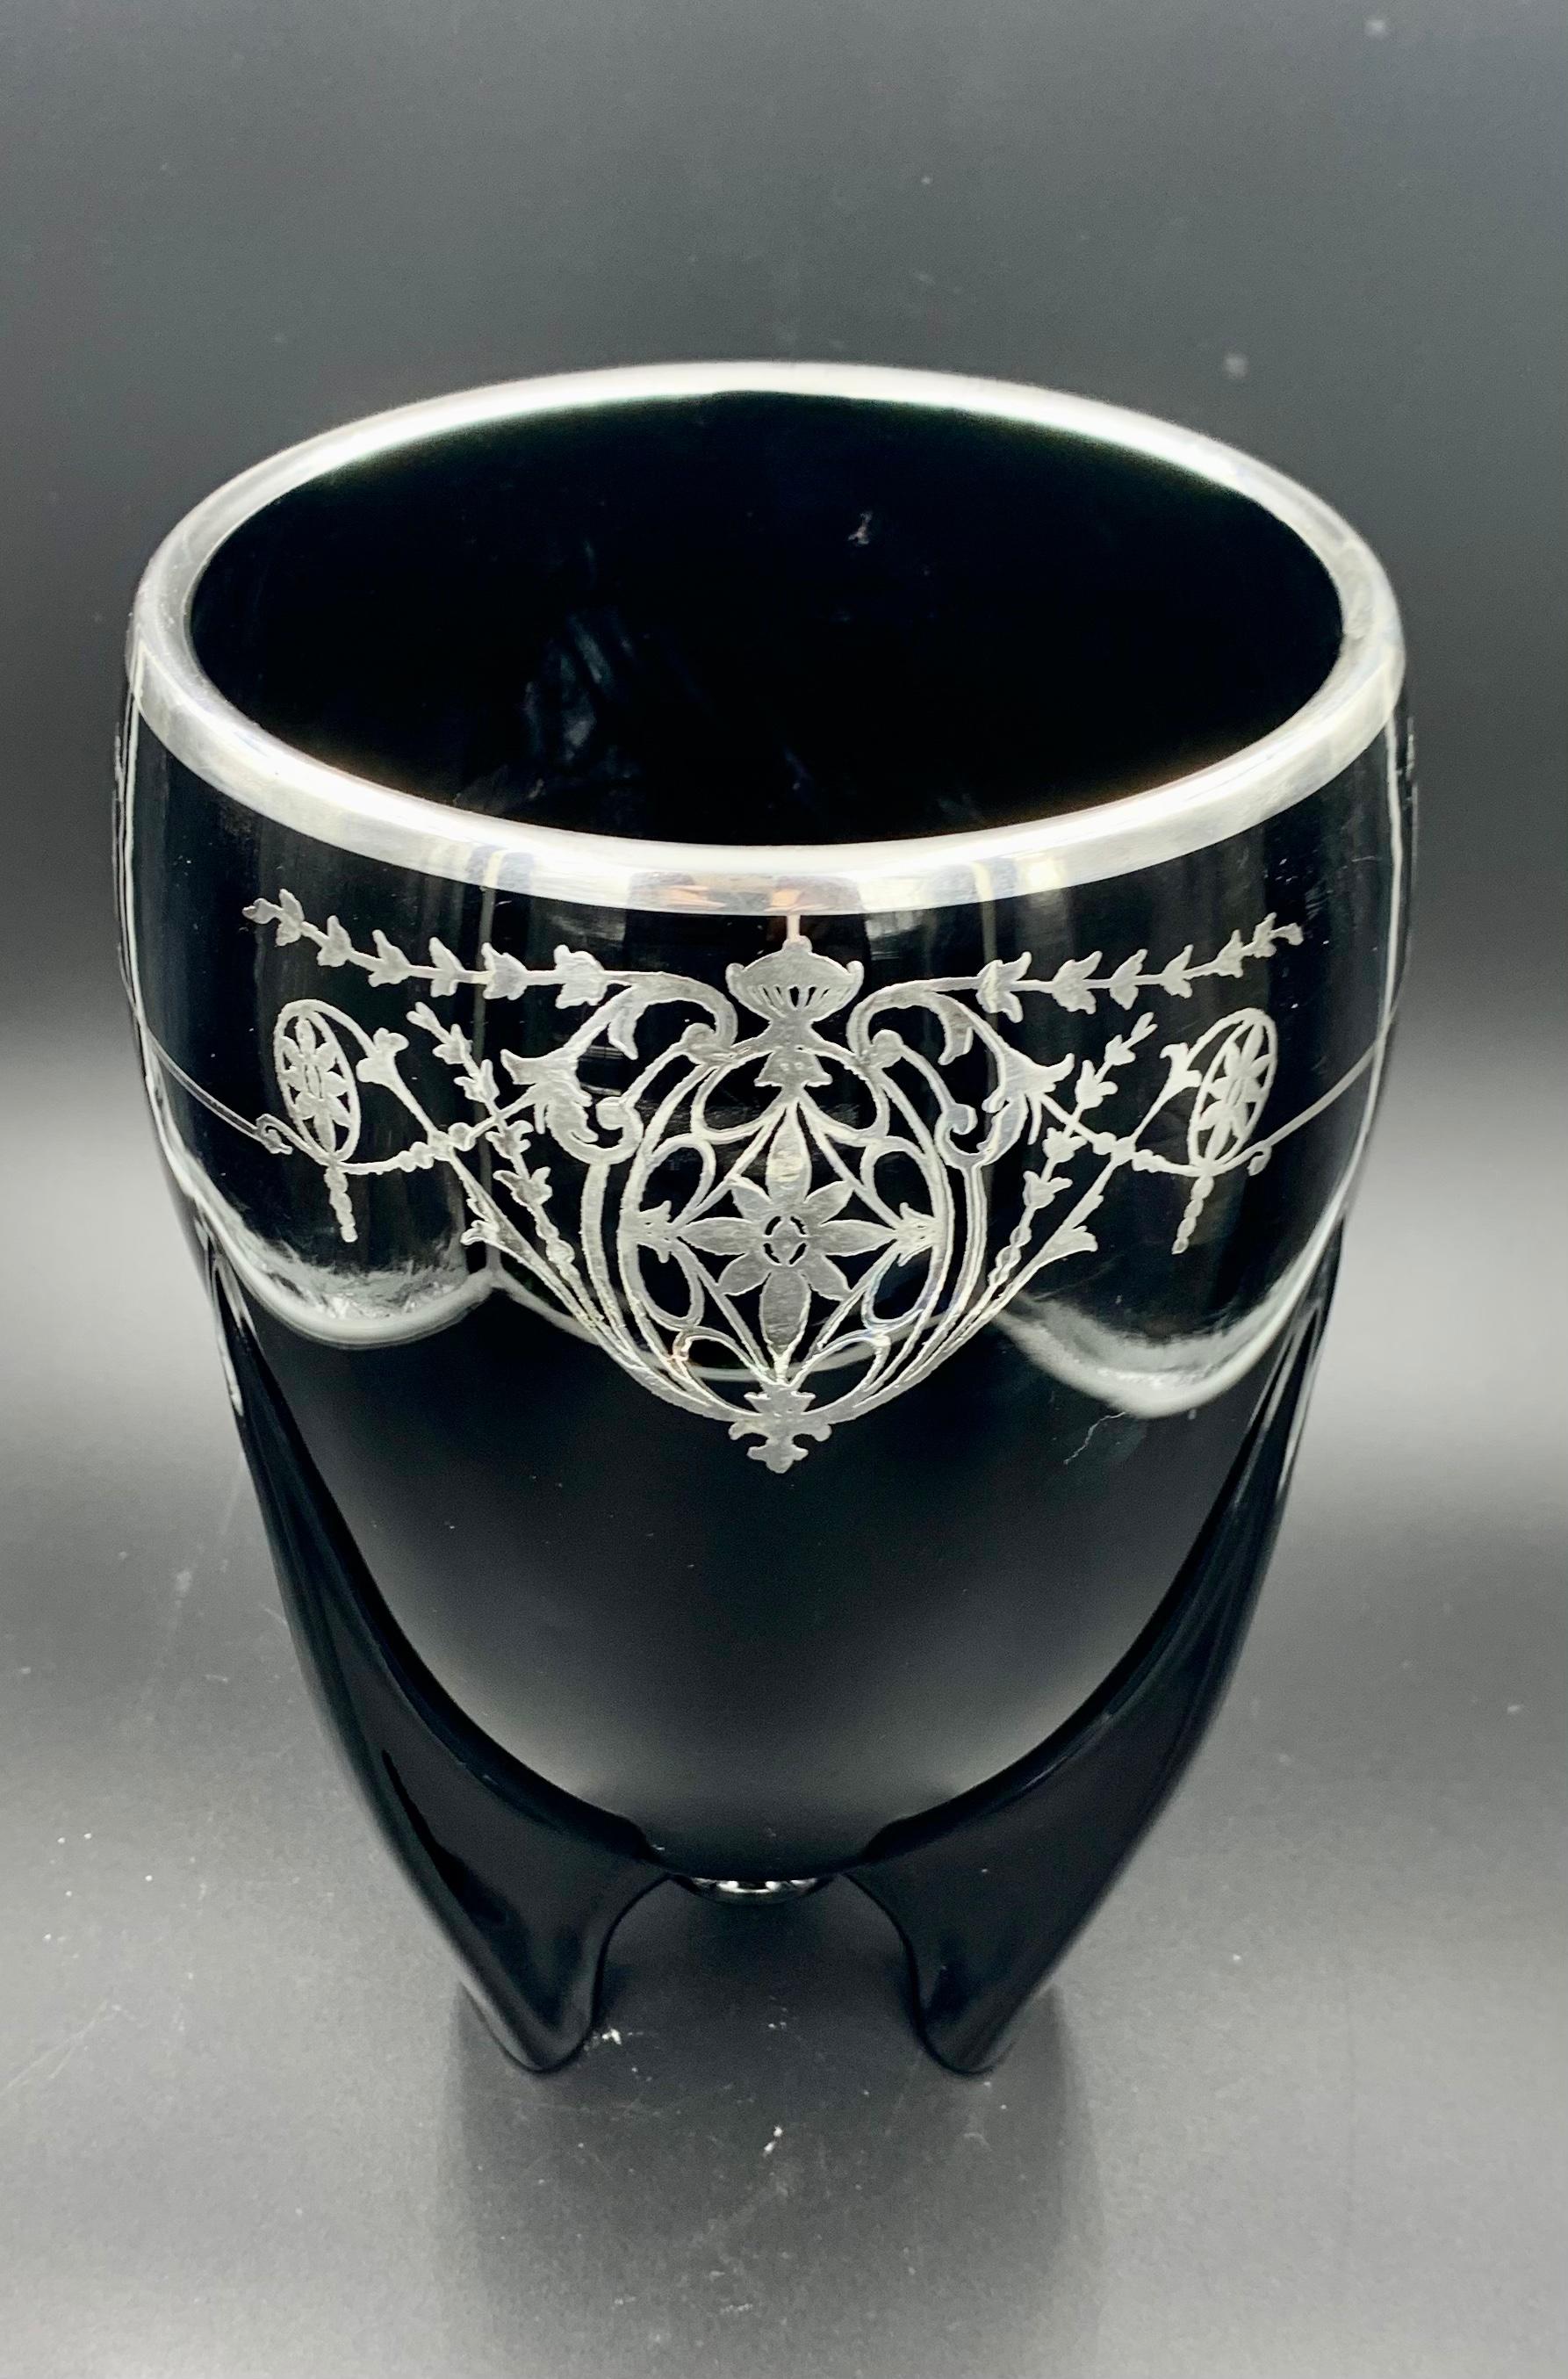 This striking black rocket vase silver overlay made in the 1930s by Duncan Miller. It is made of heavy opaque ebony glass with a bright finish. The ornate sterling silver overlay pattern repeats three times around the vase featuring a flower and